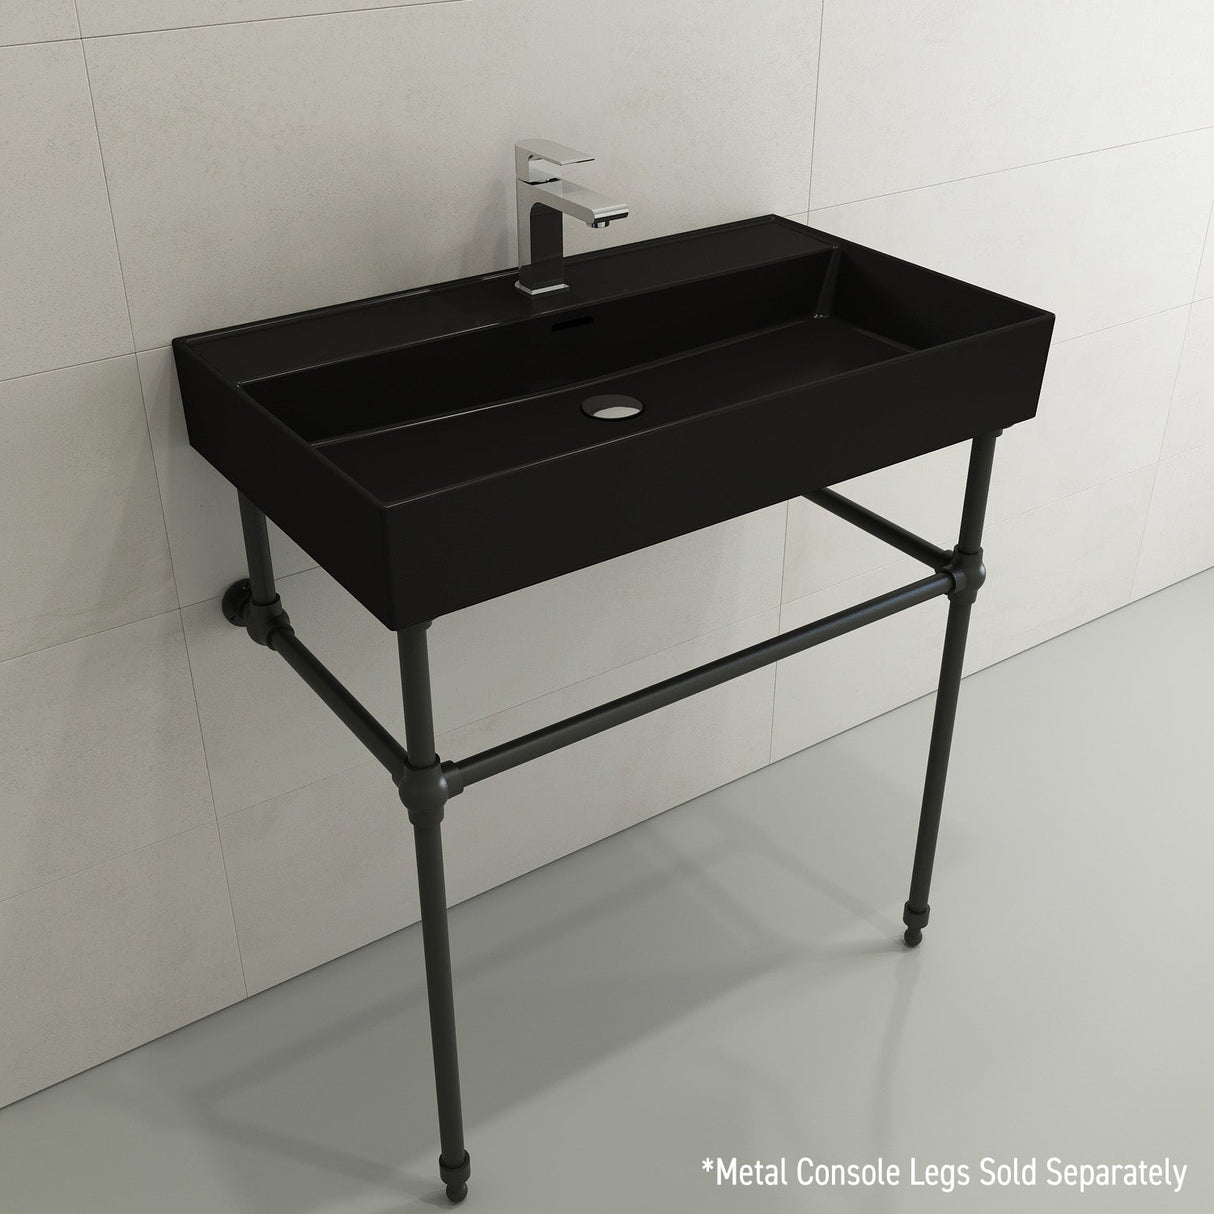 BOCCHI 1377-004-0126 Milano Wall-Mounted Sink Fireclay 32 in. 1-Hole with Overflow in Matte Black